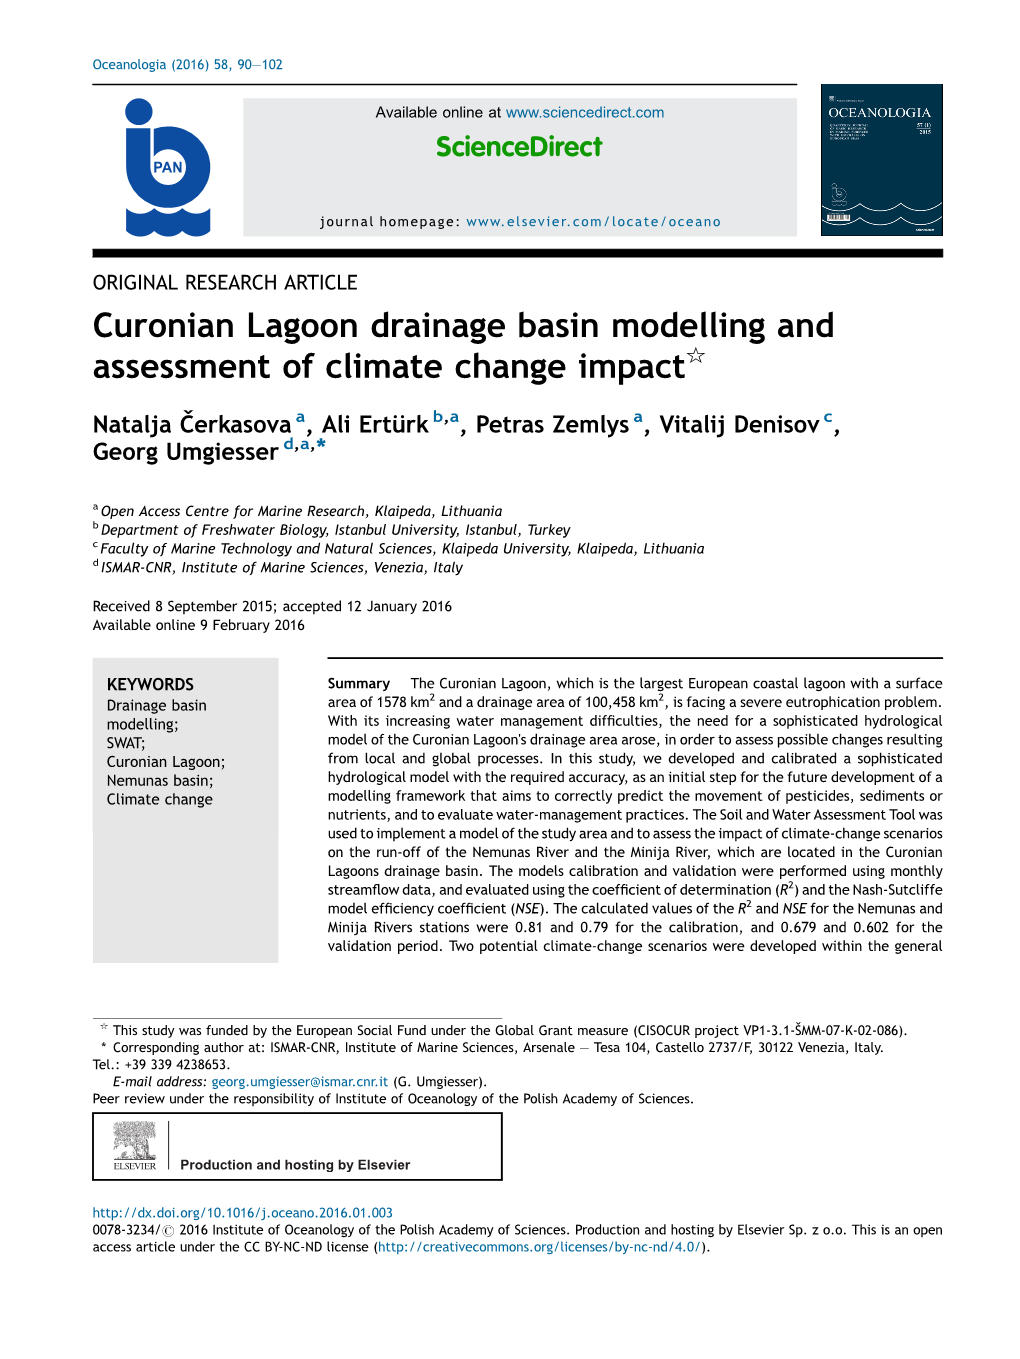 Curonian Lagoon Drainage Basin Modelling and Assessment of Climate Change Impact 91